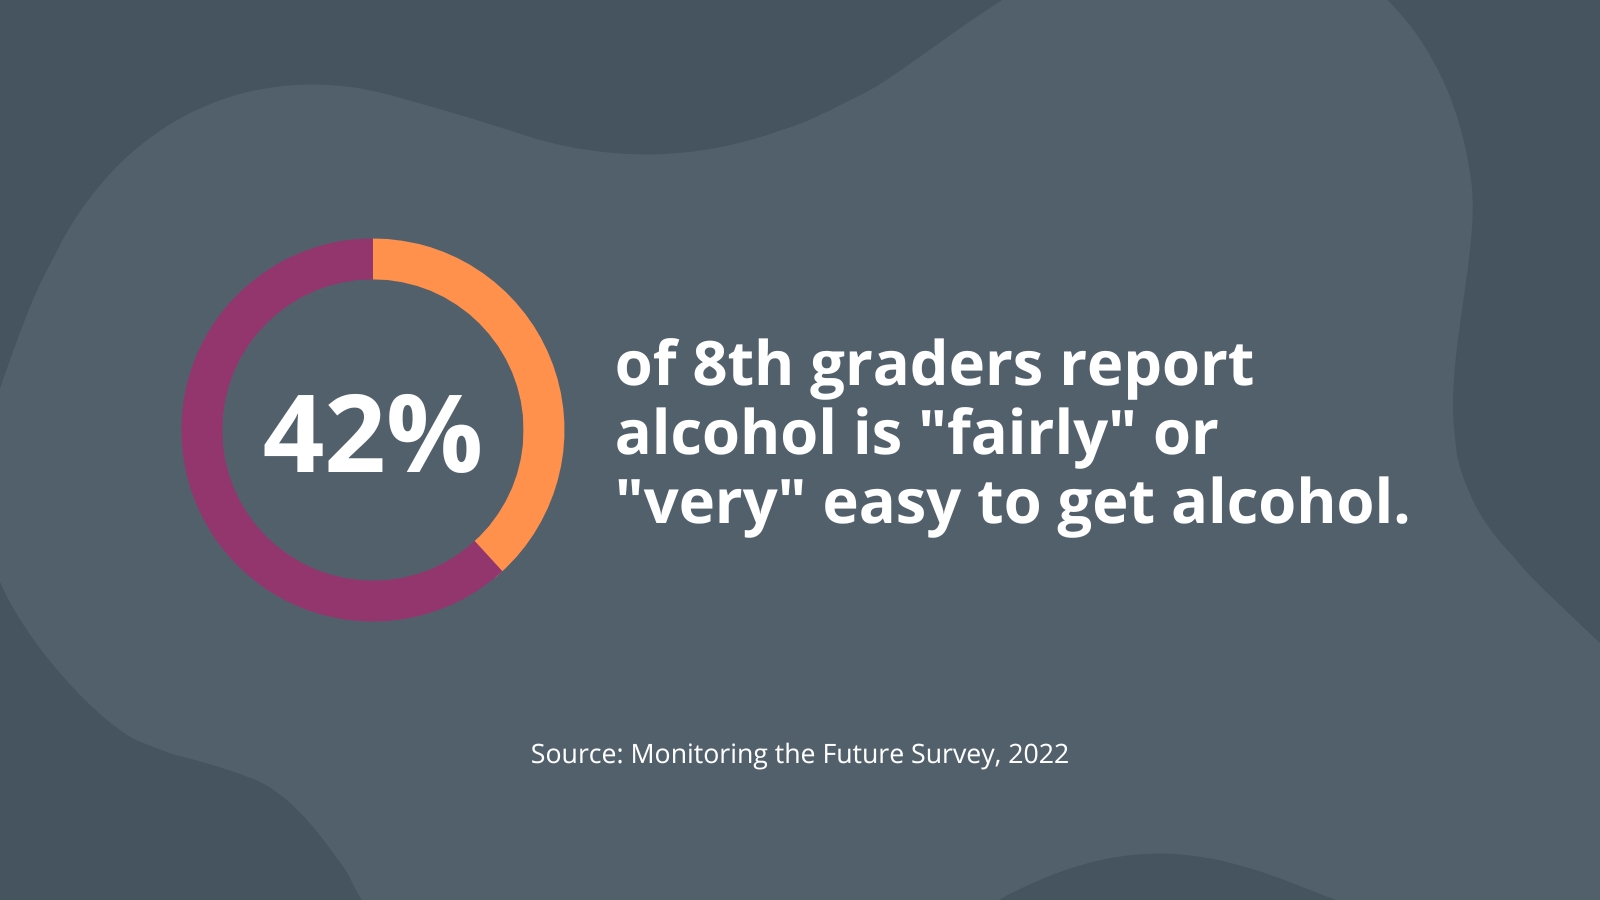 42% of 8th graders report alcohol is "fairly" or "very" easy to get alcohol.